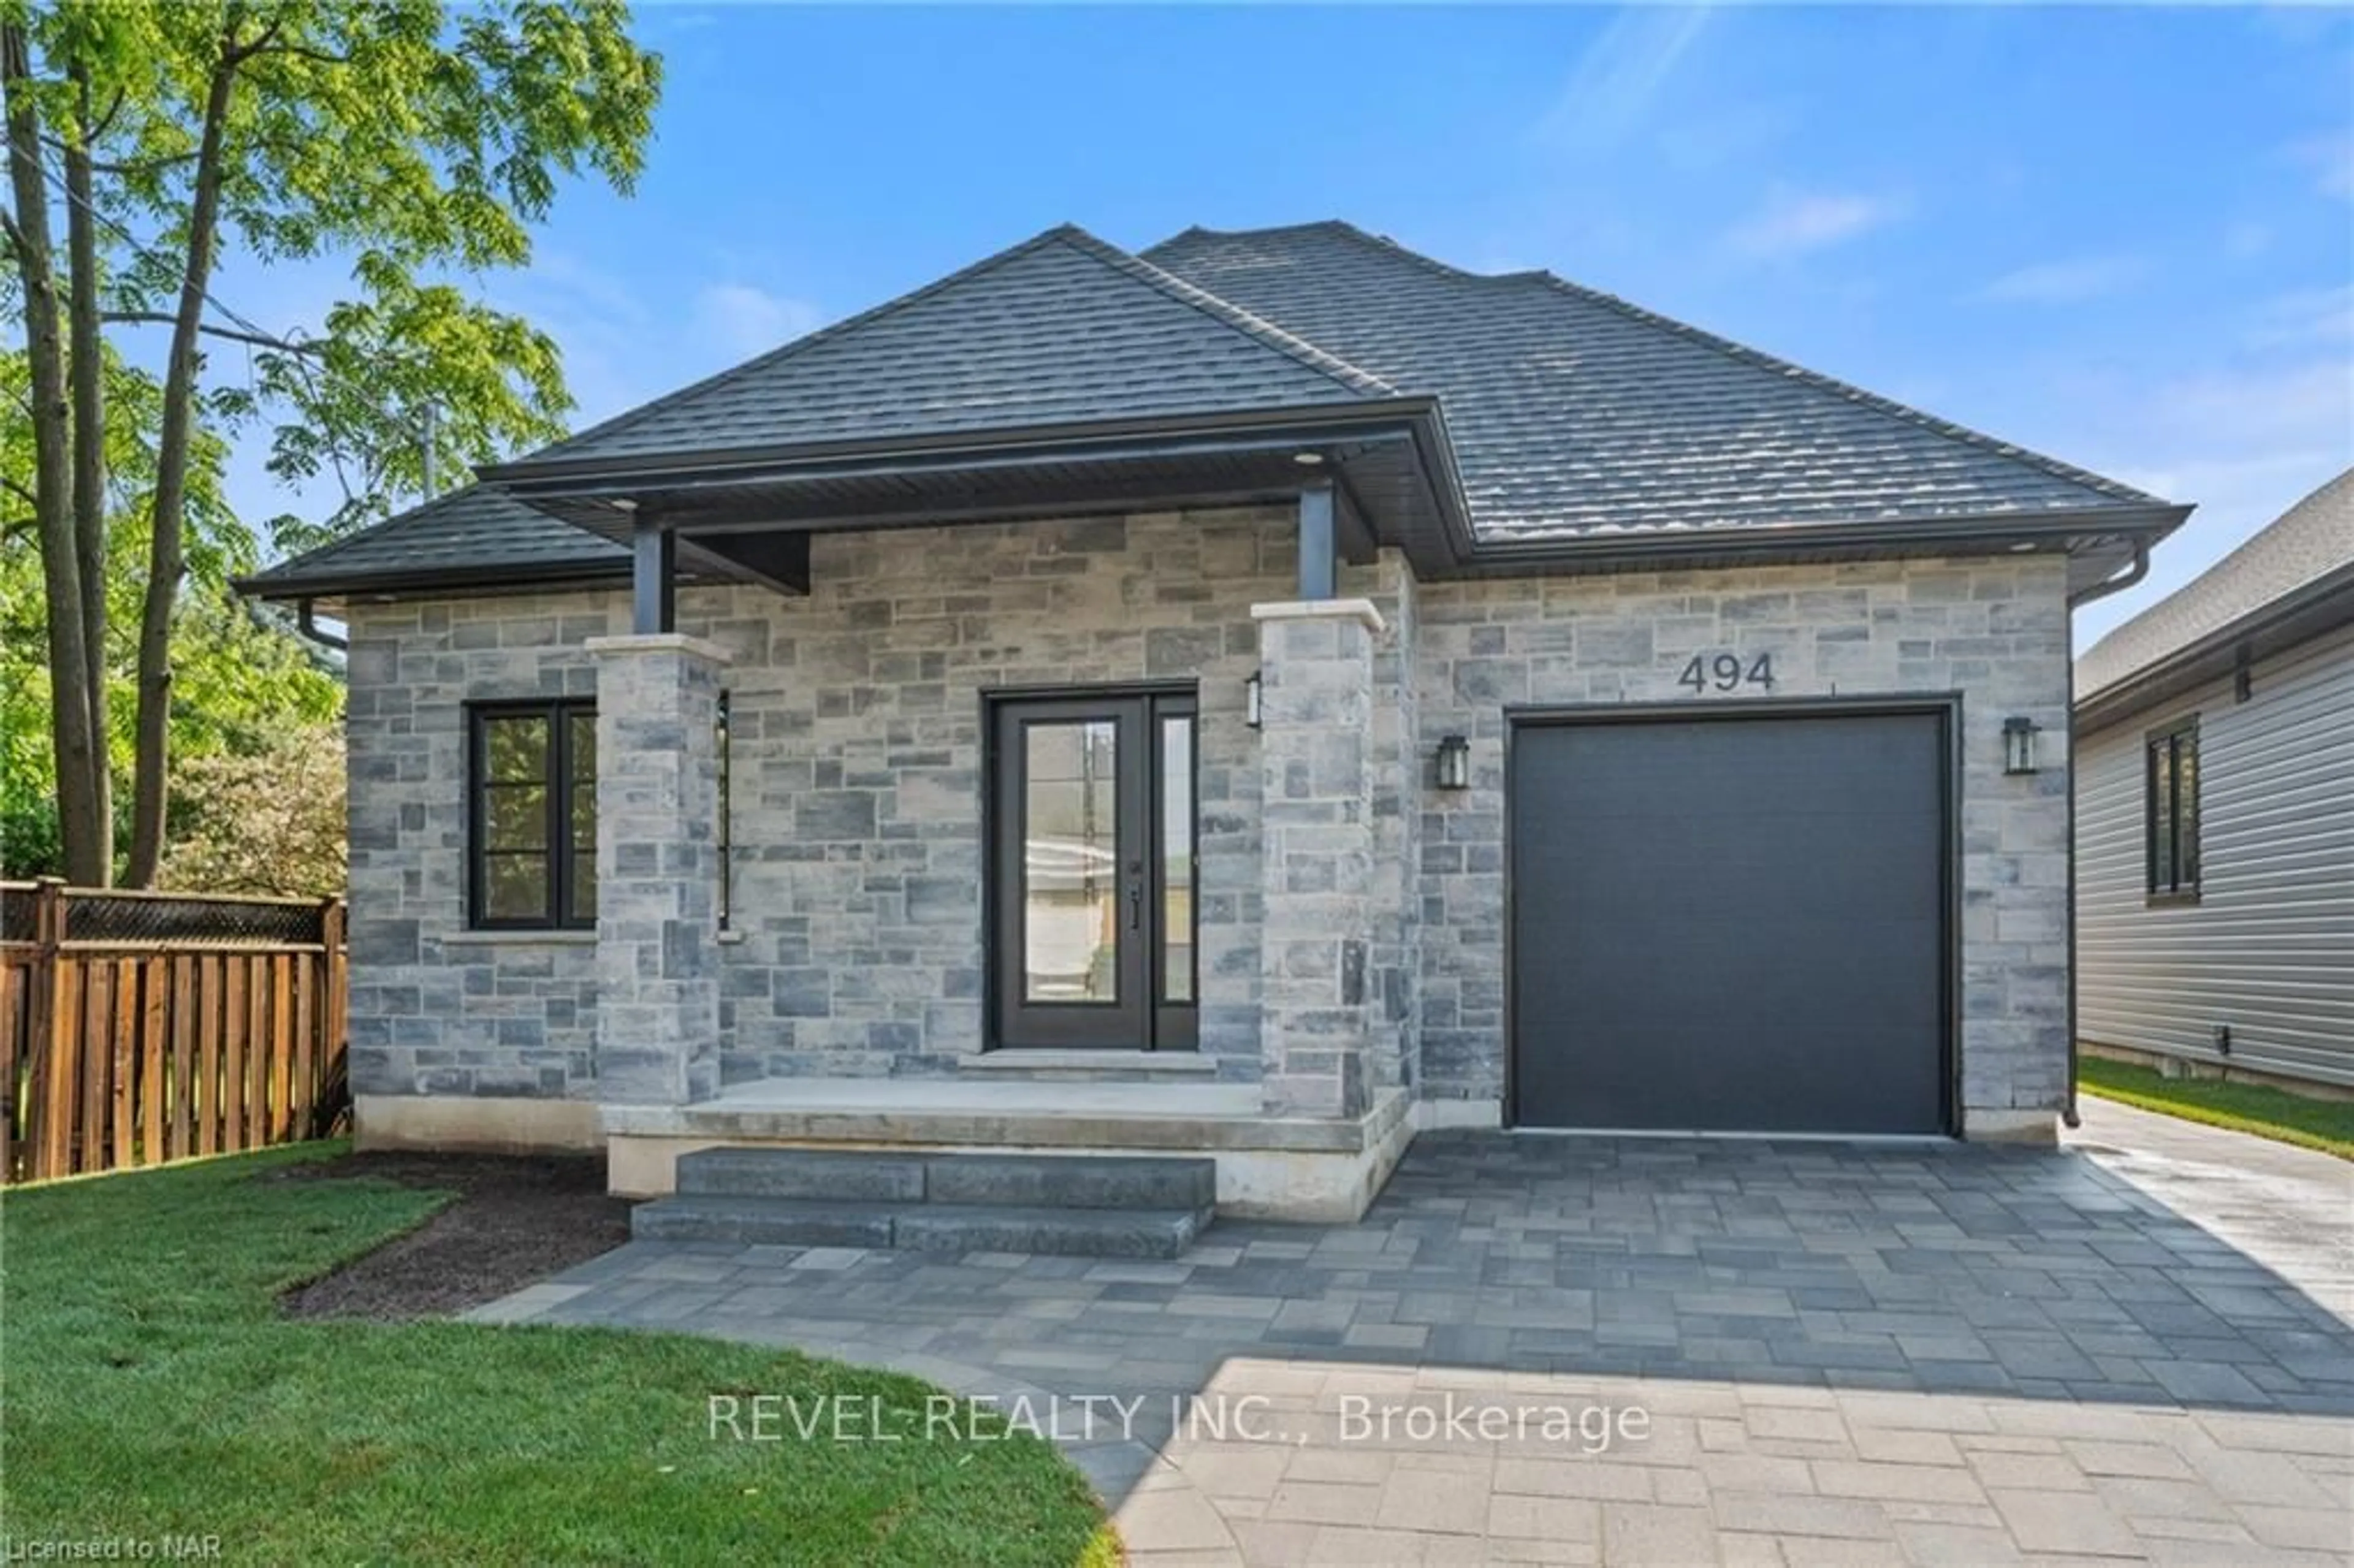 Home with brick exterior material for 494 Vine St, St. Catharines Ontario L2M 3T6